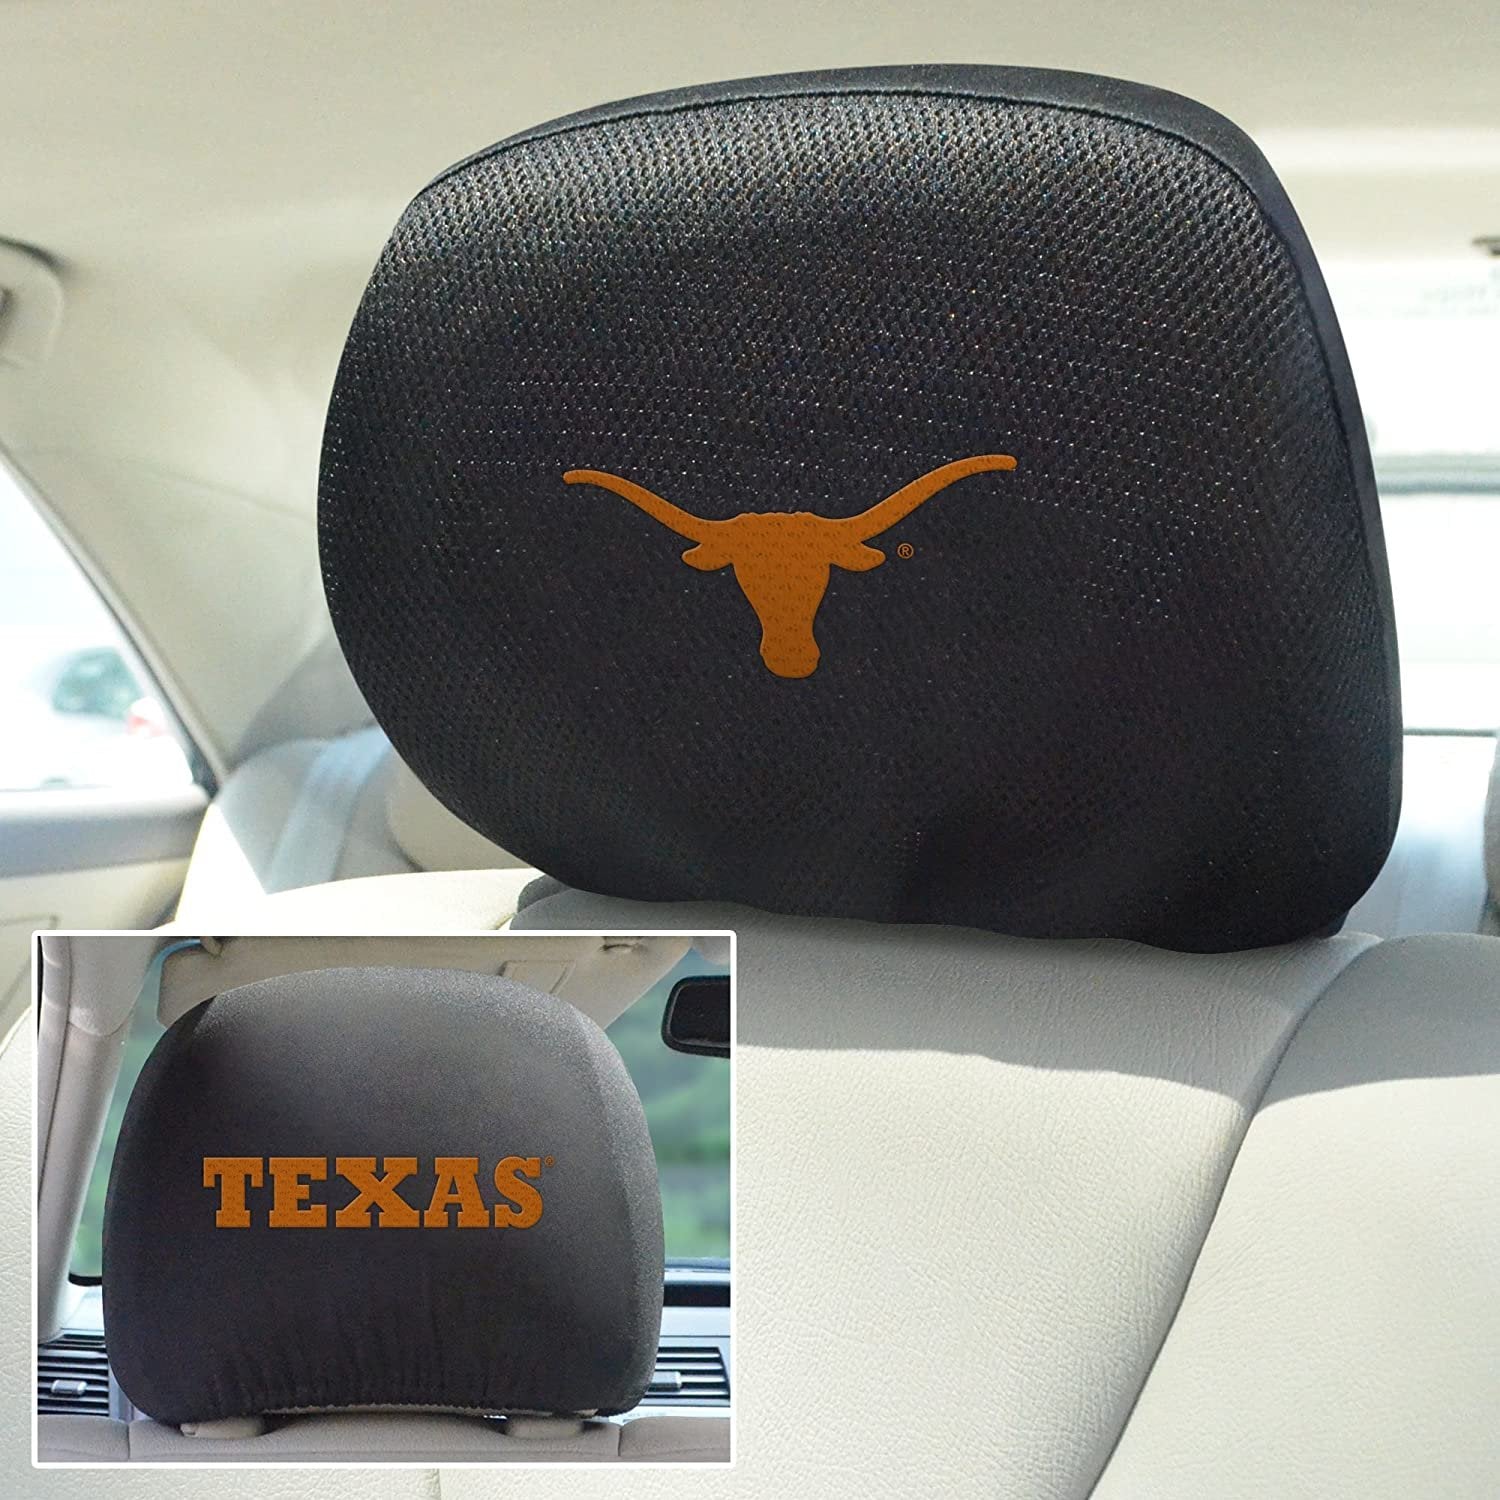 University of Texas Longhorns Pair of Premium Auto Head Rest Covers, Embroidered, Black Elastic, 14x10 Inch